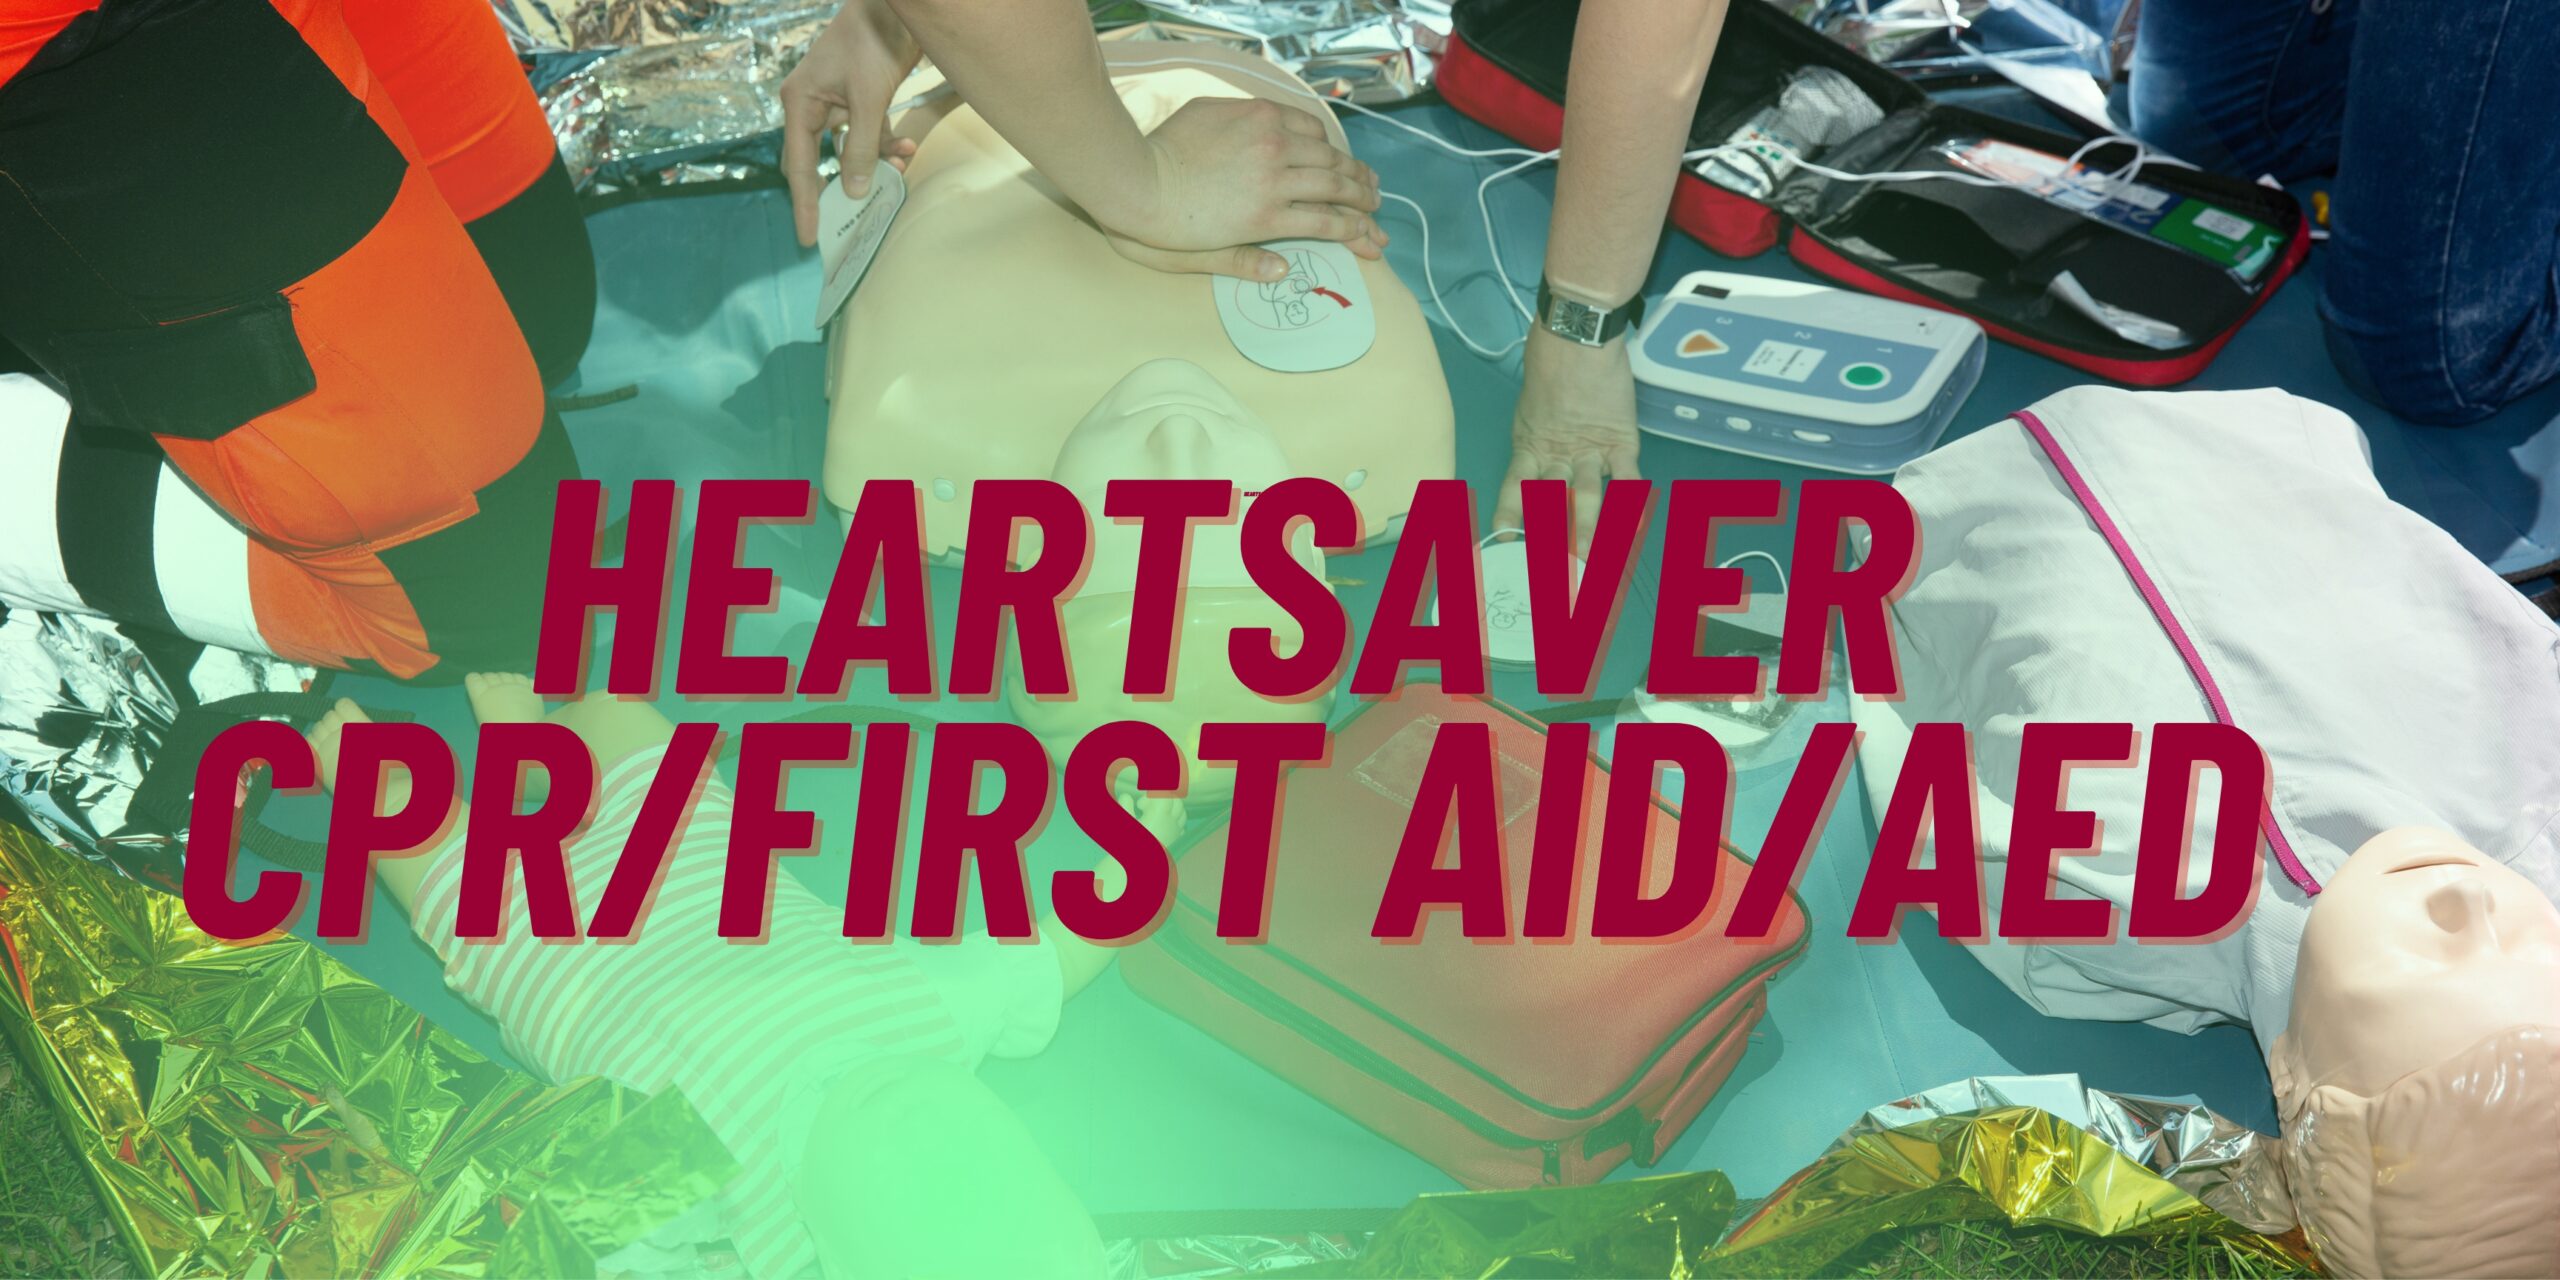 Heartsaver CPR First Aid AED